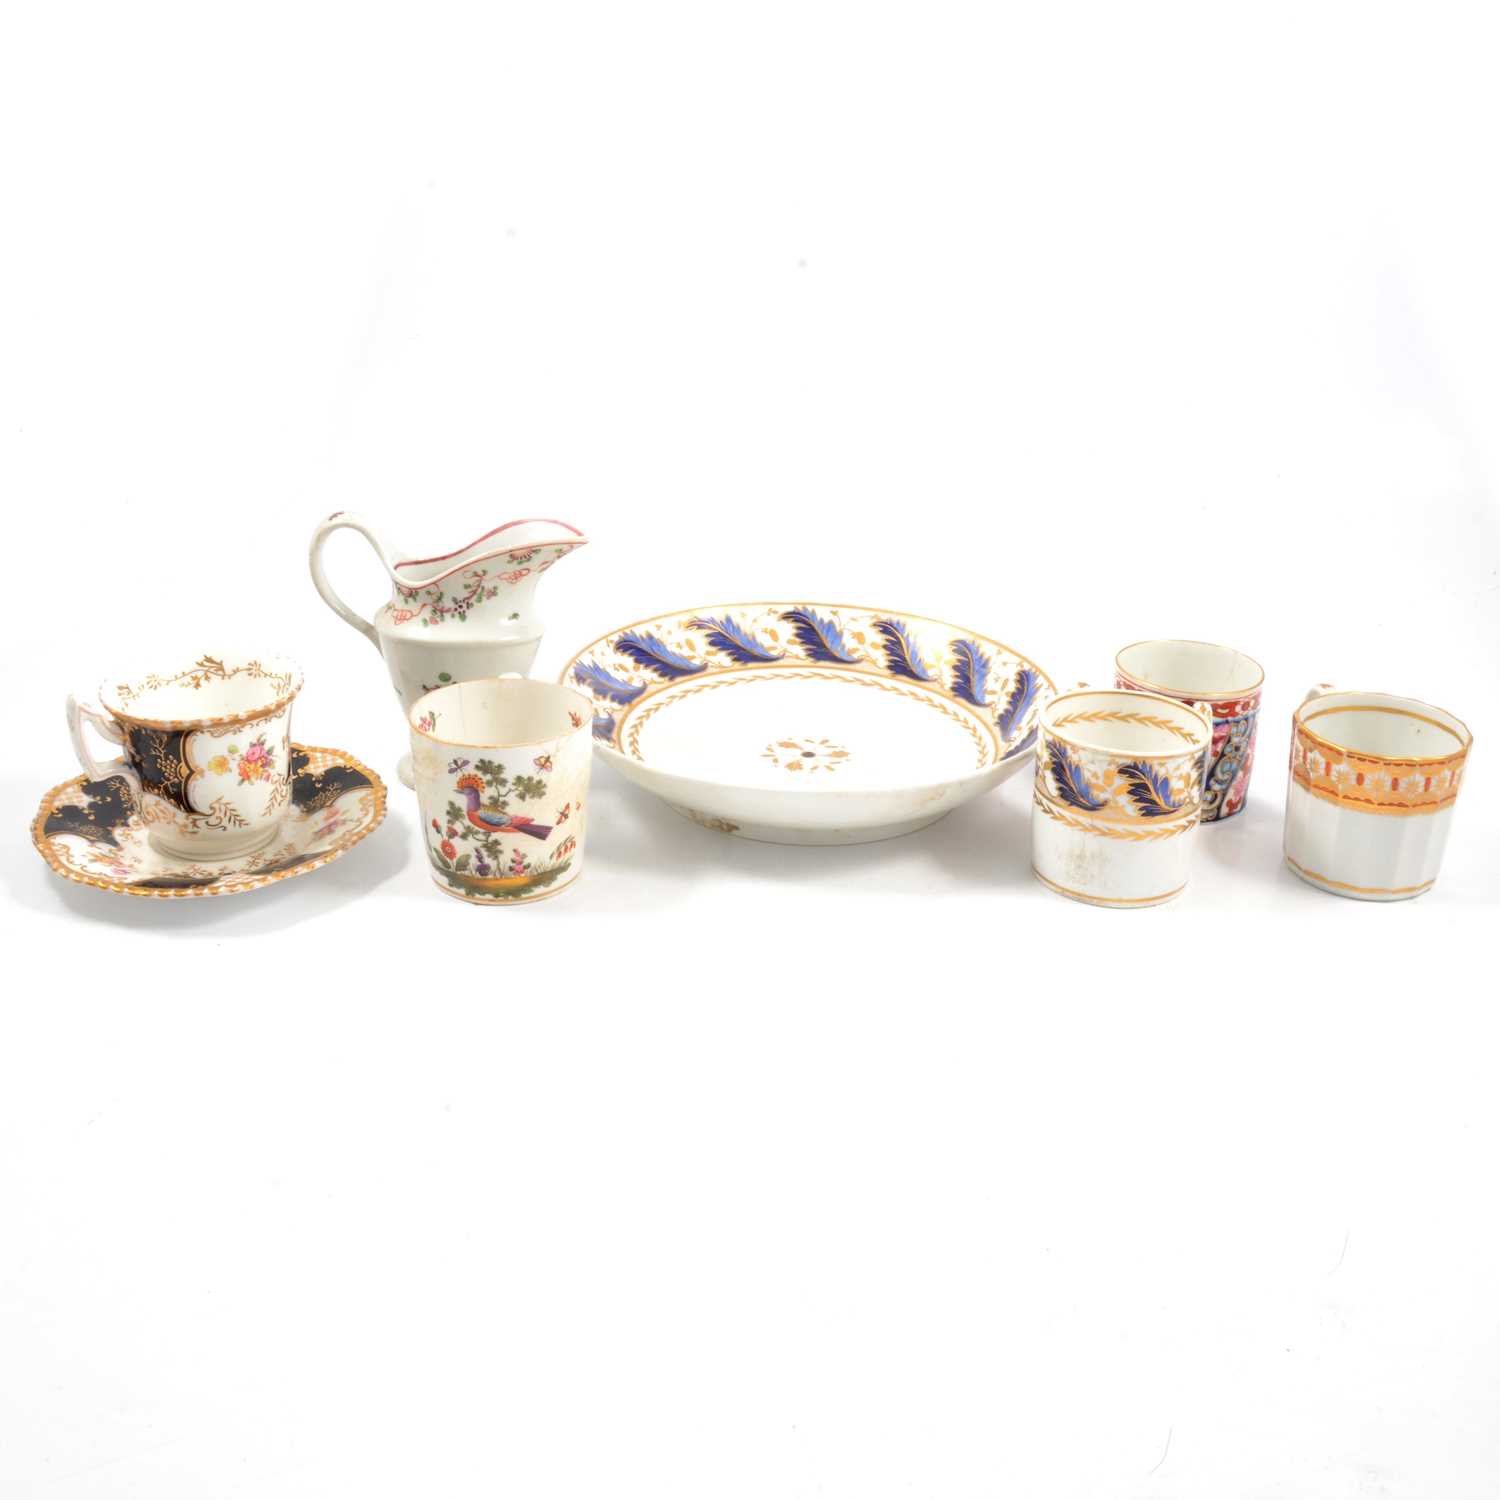 Lot 27 - A small collection of British 18th century porcelain